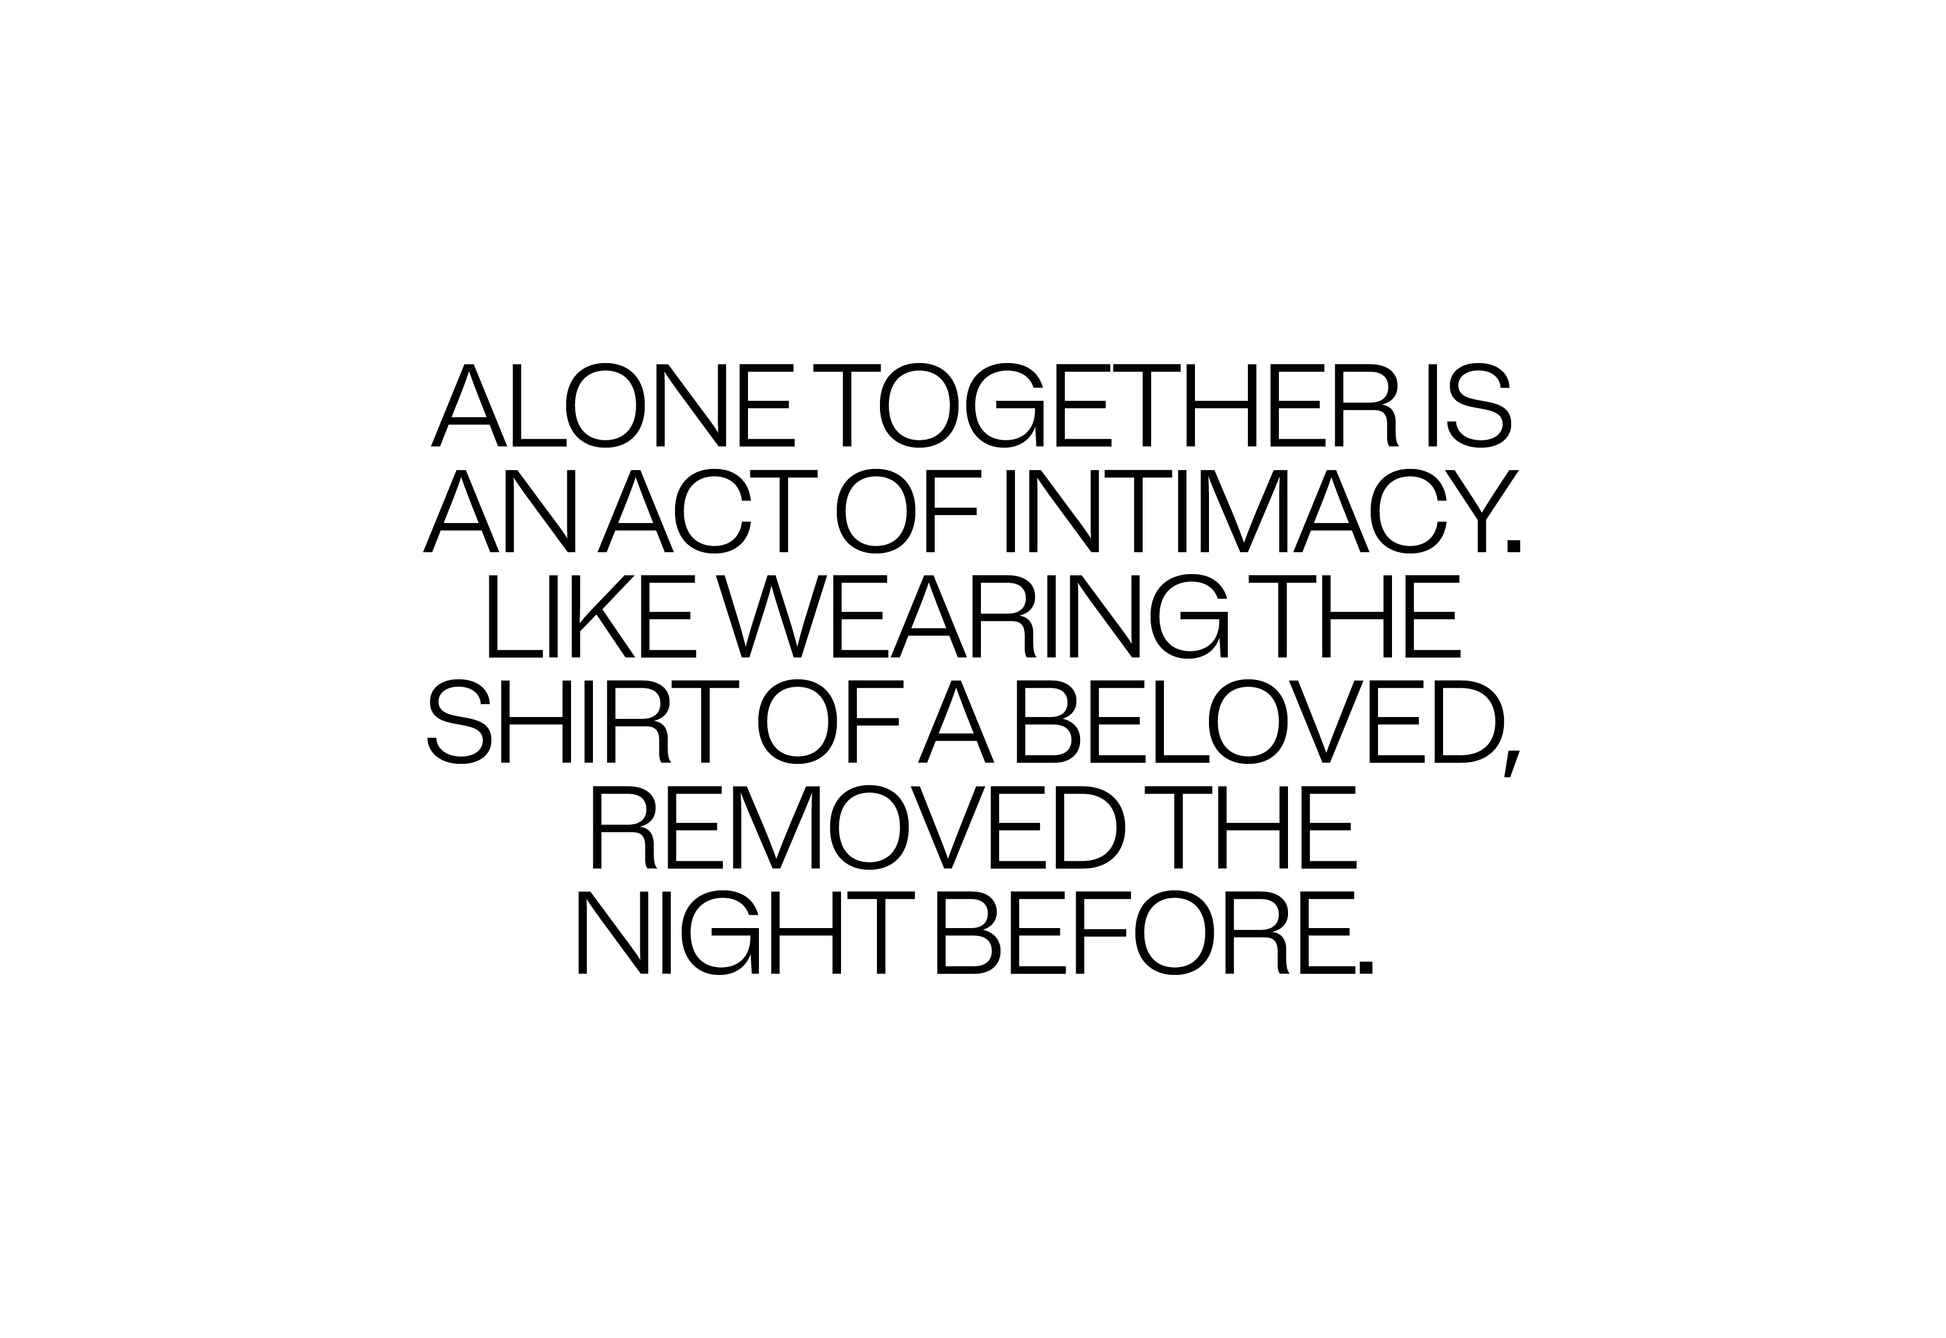 Alone Together is an act of intimacy